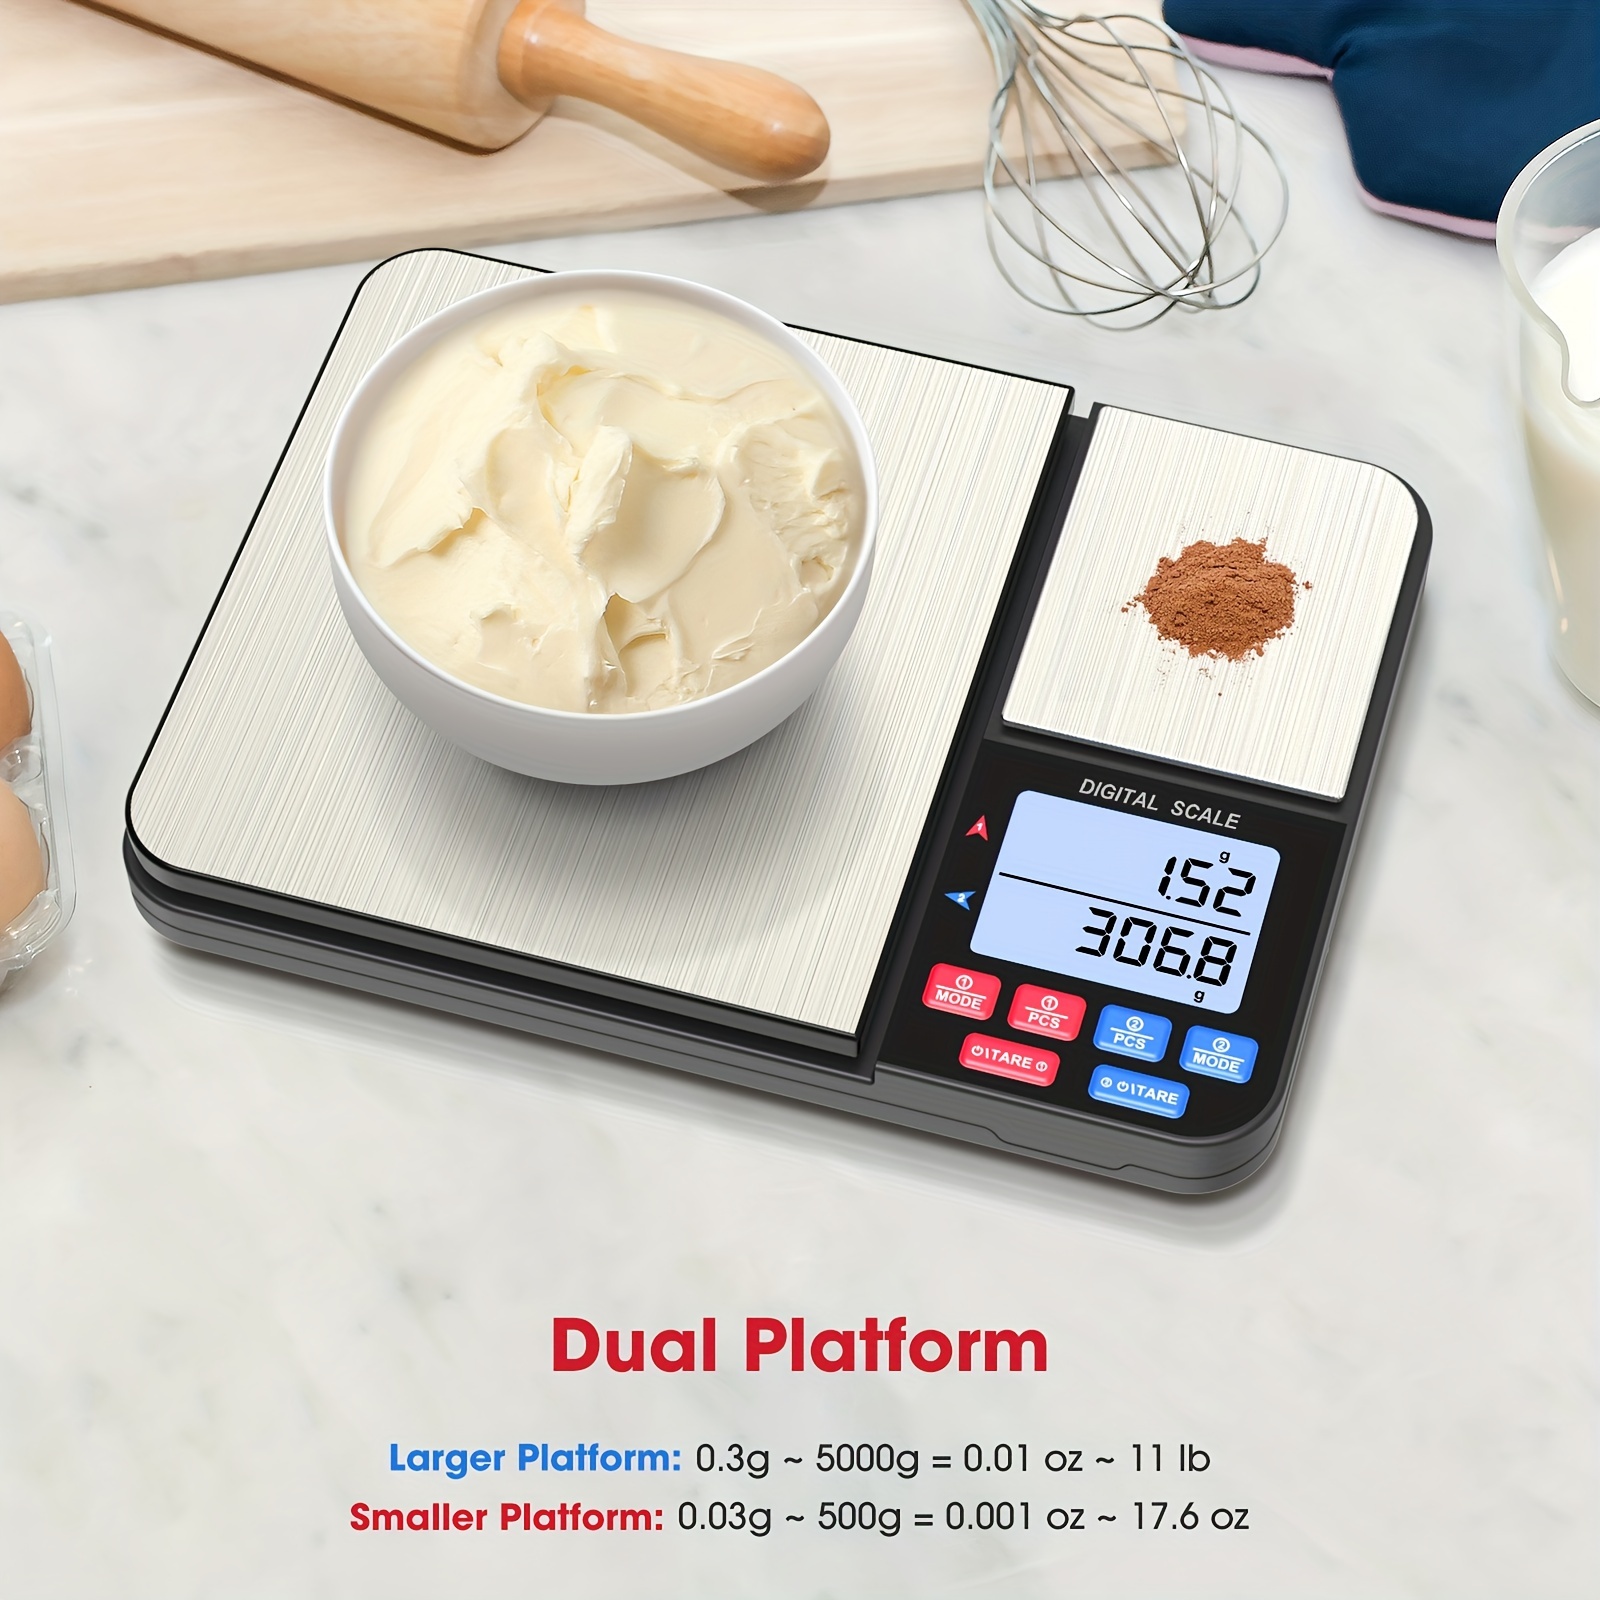 Digital Kitchen Scale Food Scale,Food Grade Balance Scale 0.1oz/1g  Increment,22 lb/10 kg,Backlit LCD Display Function for Weight Loss, Baking